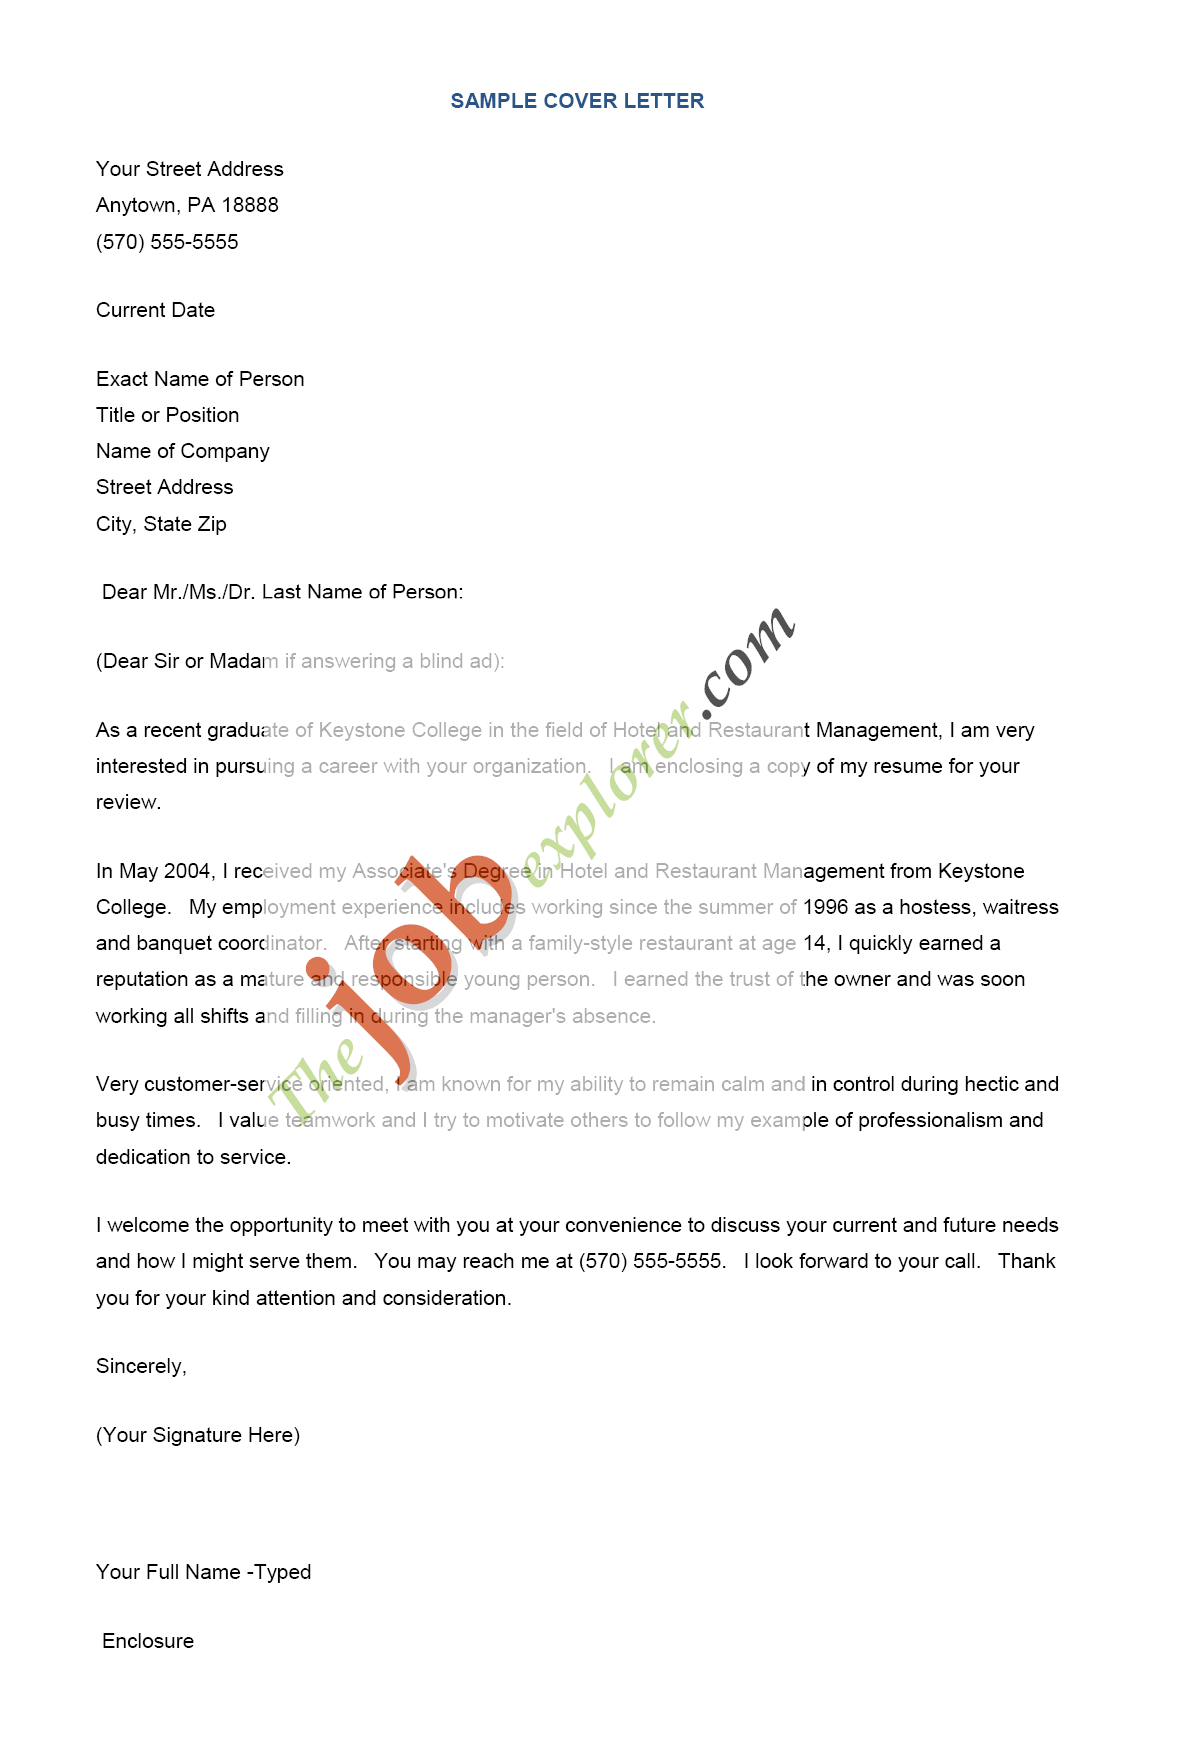 Professional cover letter services